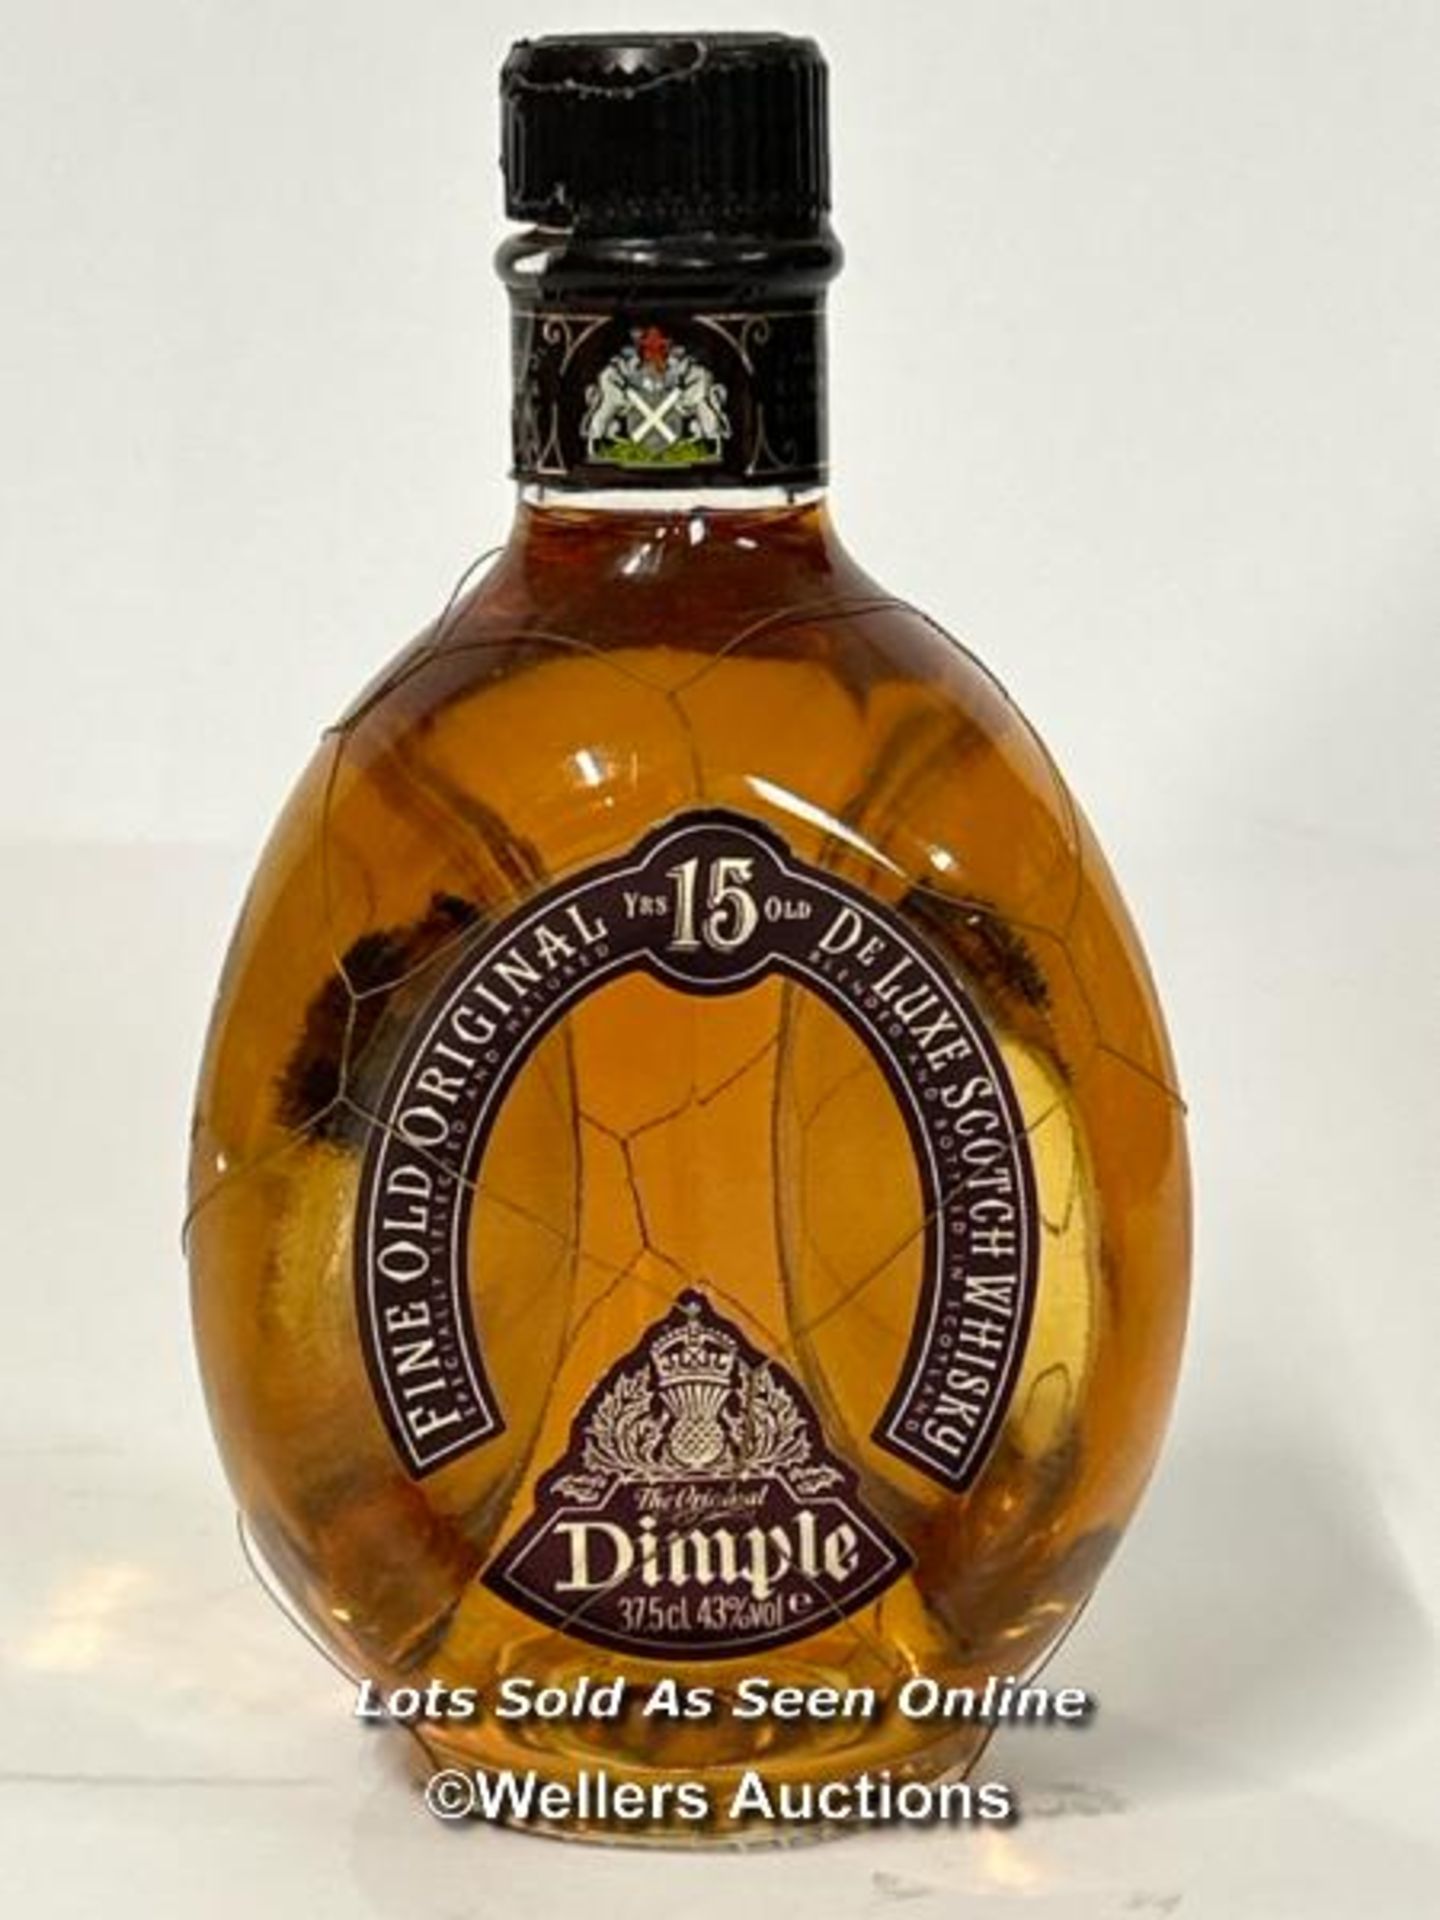 Dimple Haig 12yr whisky in decorative pewter bottle (opened) with a bottle of Dimple 15yr whisky, - Bild 4 aus 5